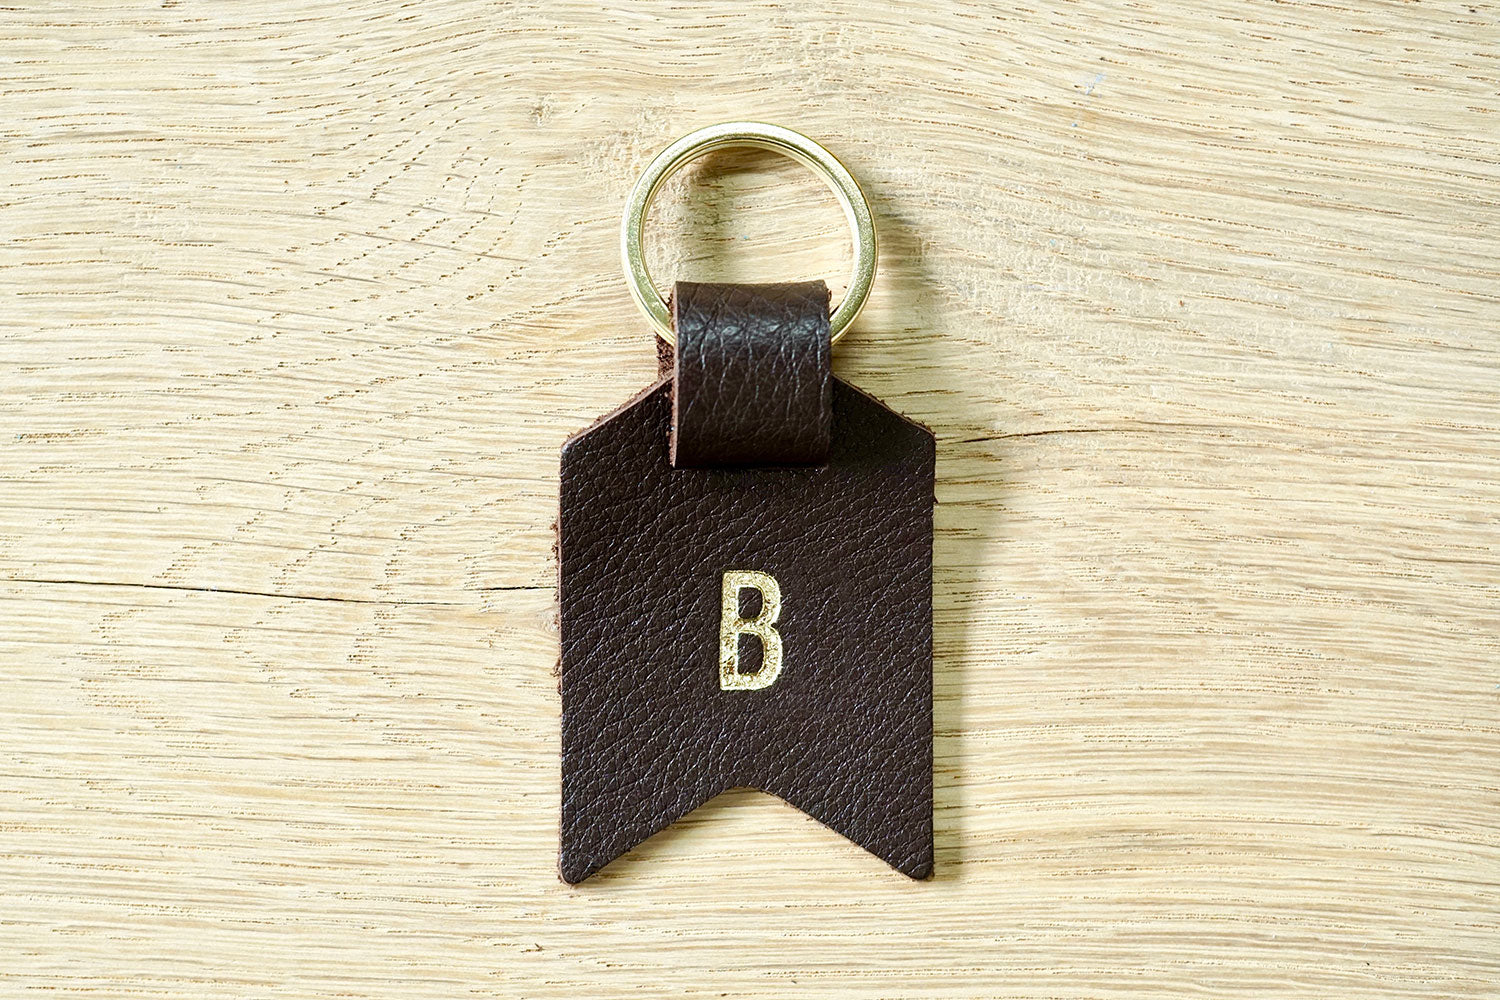 Personalised Daddy keyring from Bookshell Bindery monogrammed with 1 initial